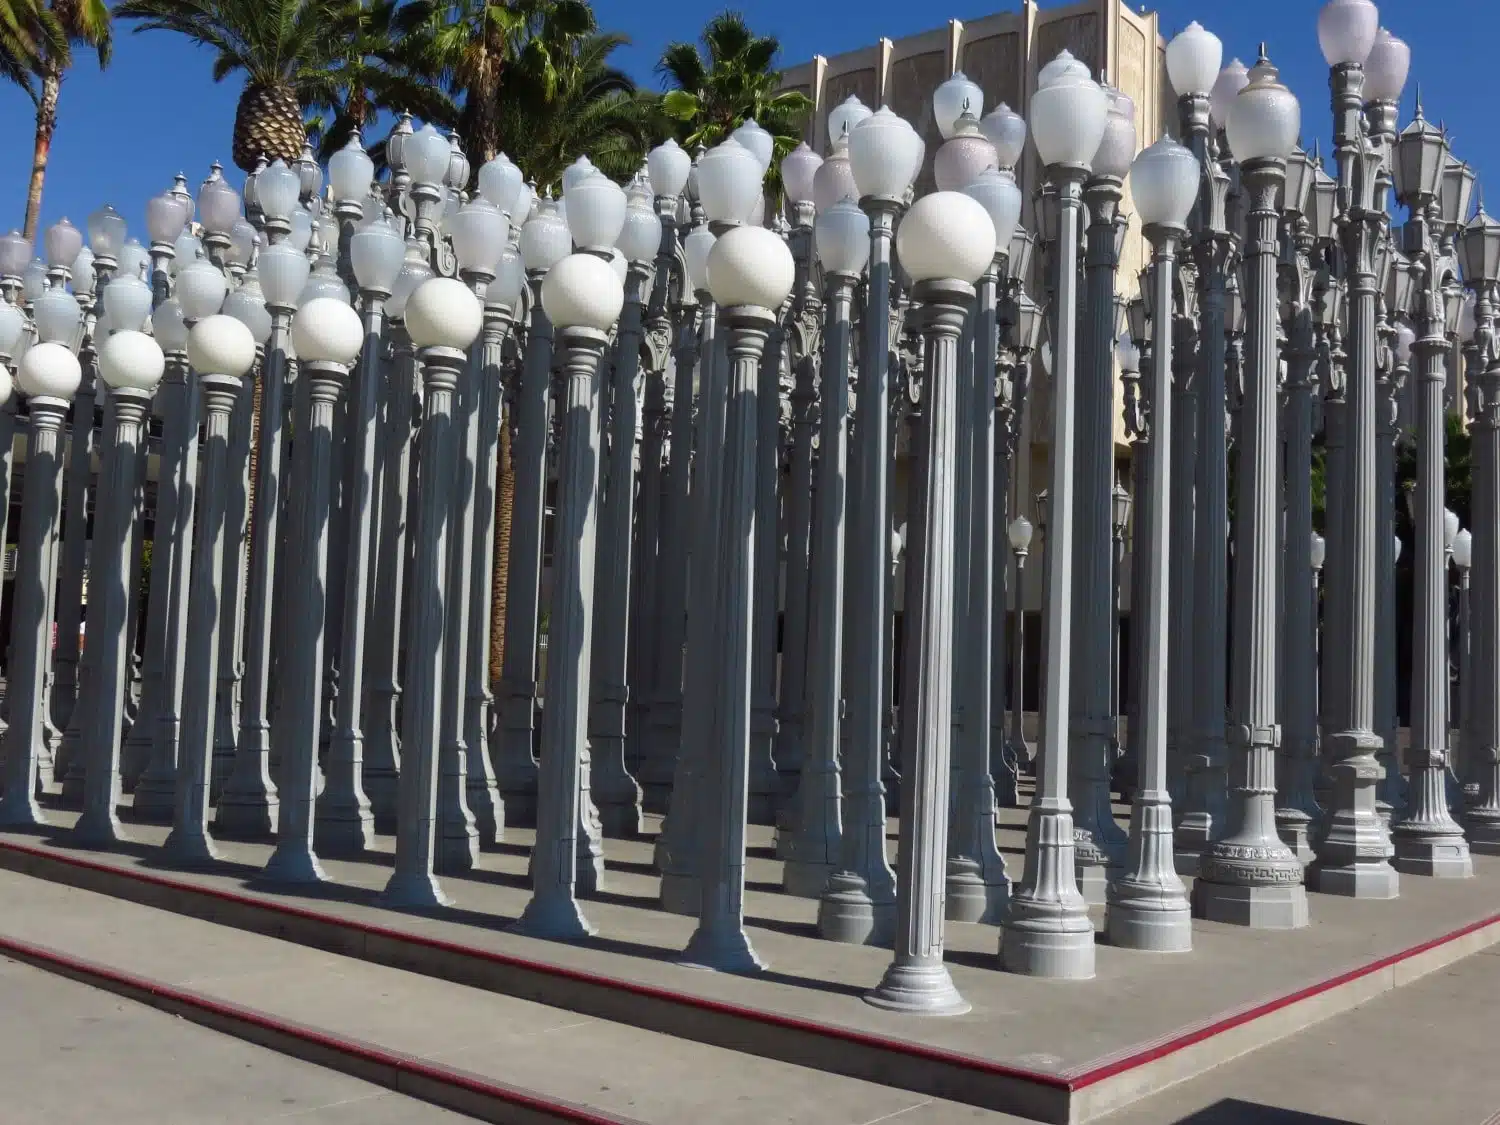  Cool places in Los Angeles LACMA 